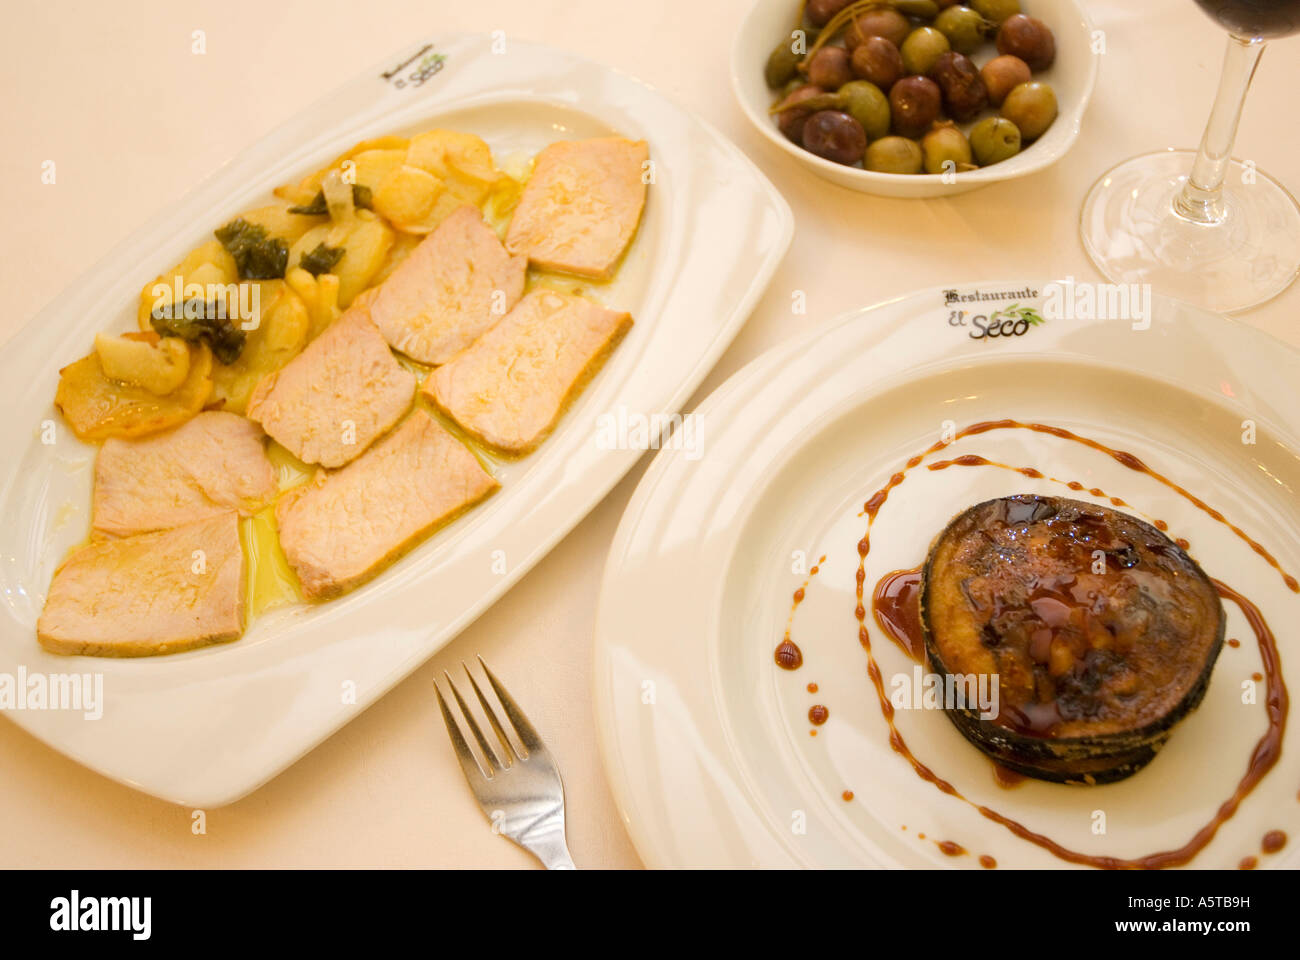 Aubergine with fresh cheese and honey loin with potatoes olives El Seco restaurant UBEDA Jaen province Andalusia region Spain Stock Photo